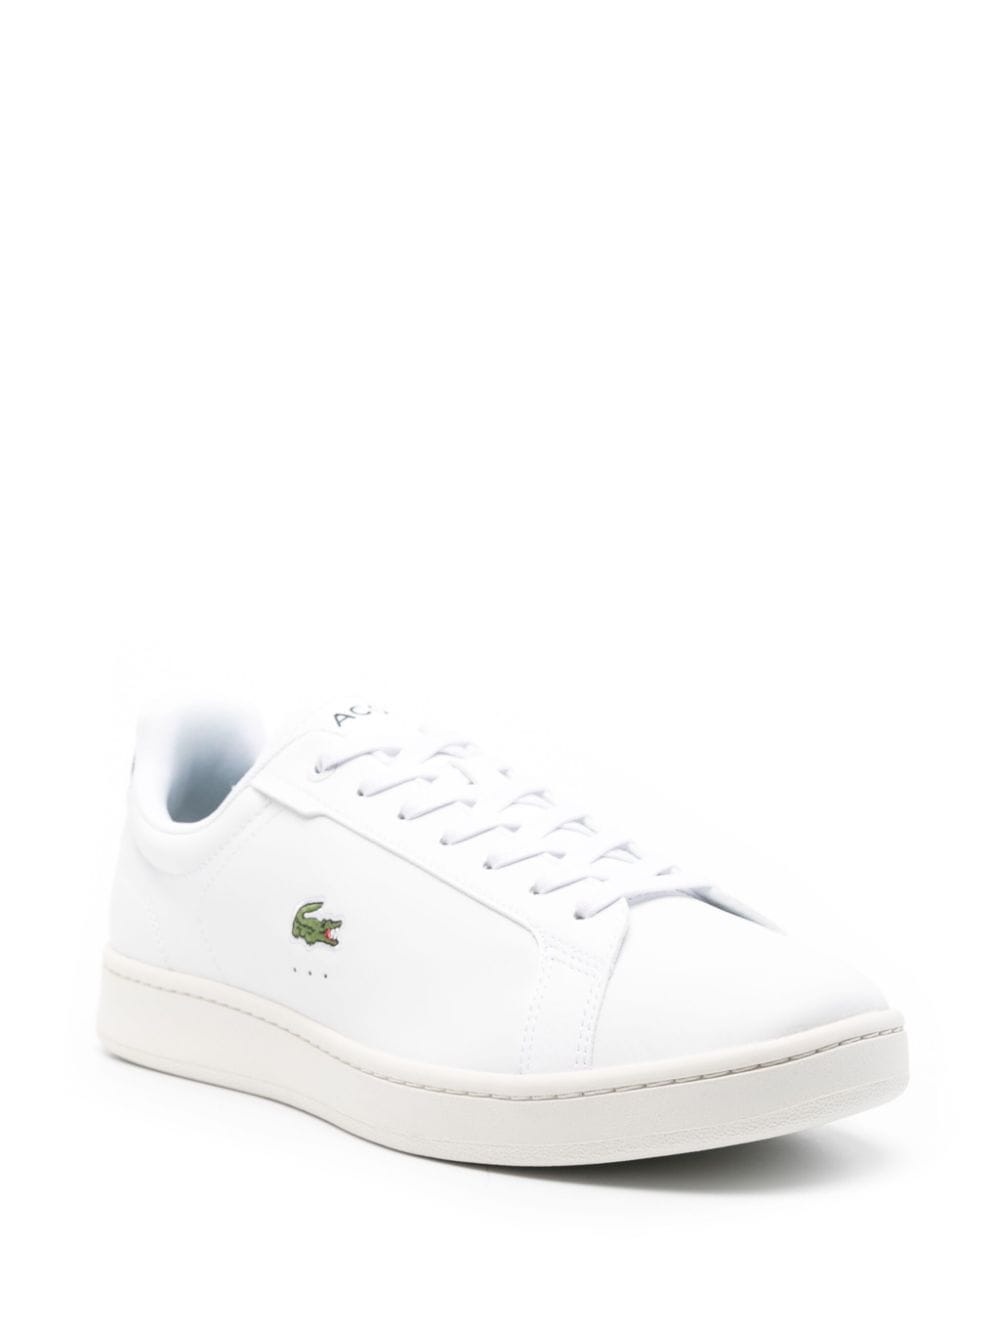 Carnaby Pro Premium leather sneakers - 2